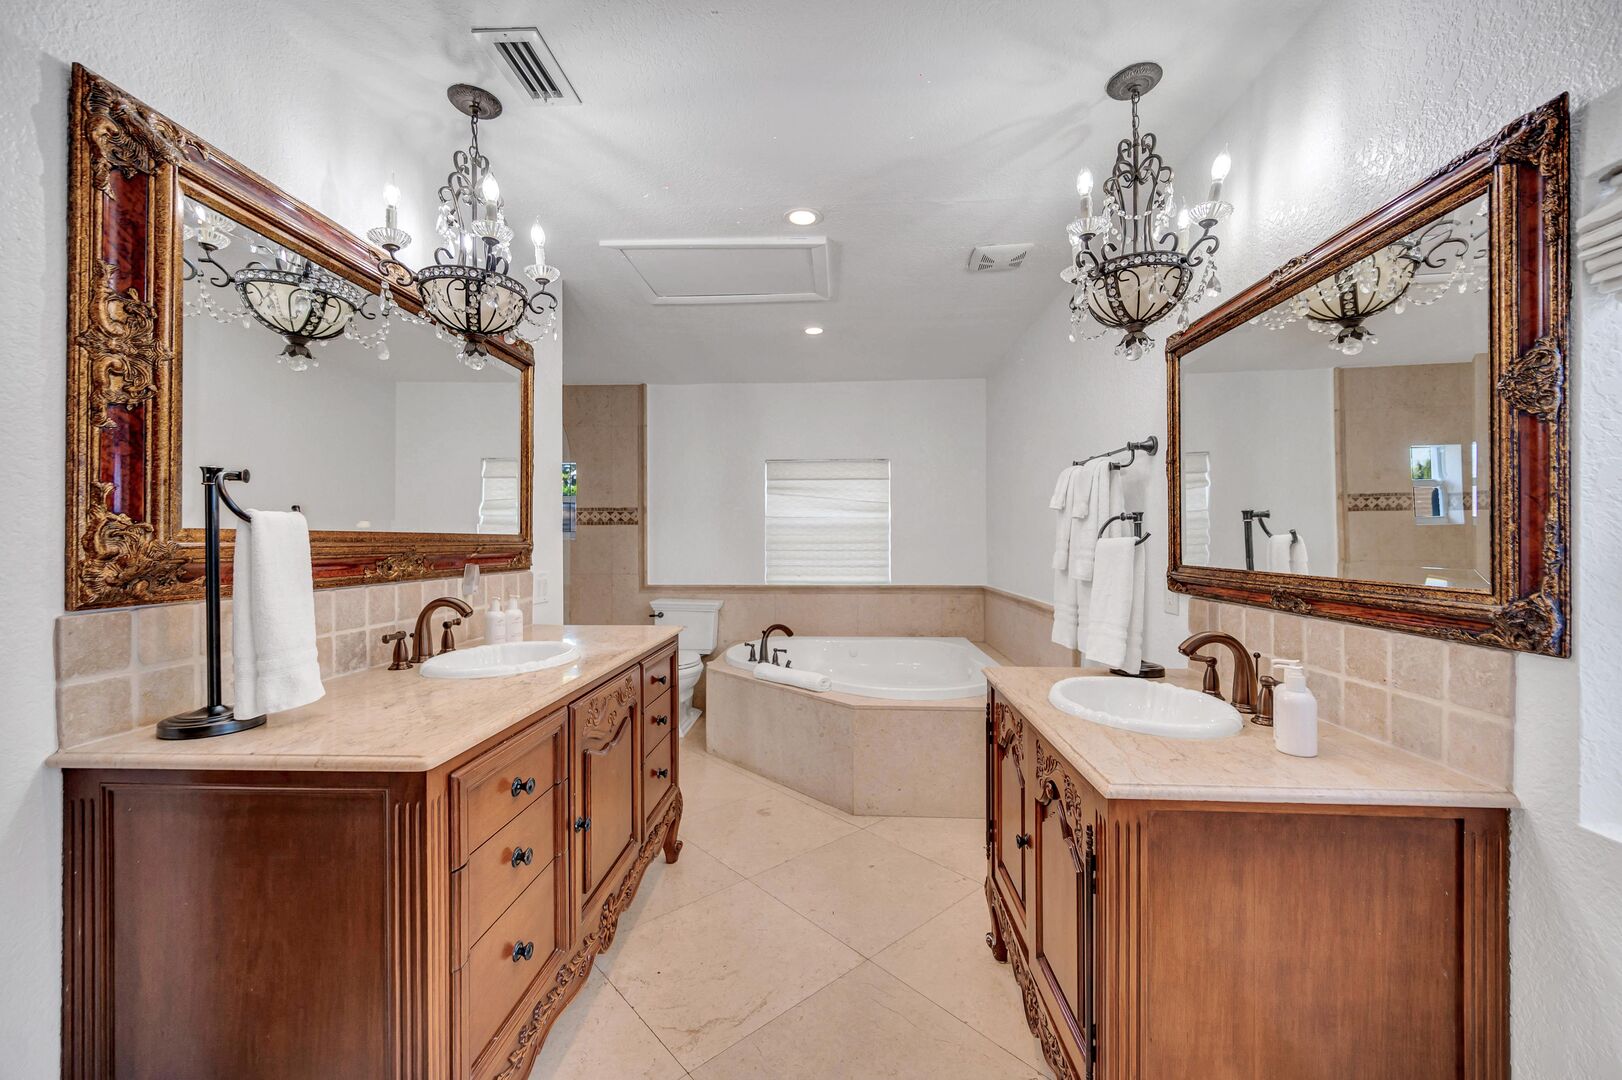 Both bedrooms four and five share a bathroom featuring two vanities, a bathtub and walk-in shower.